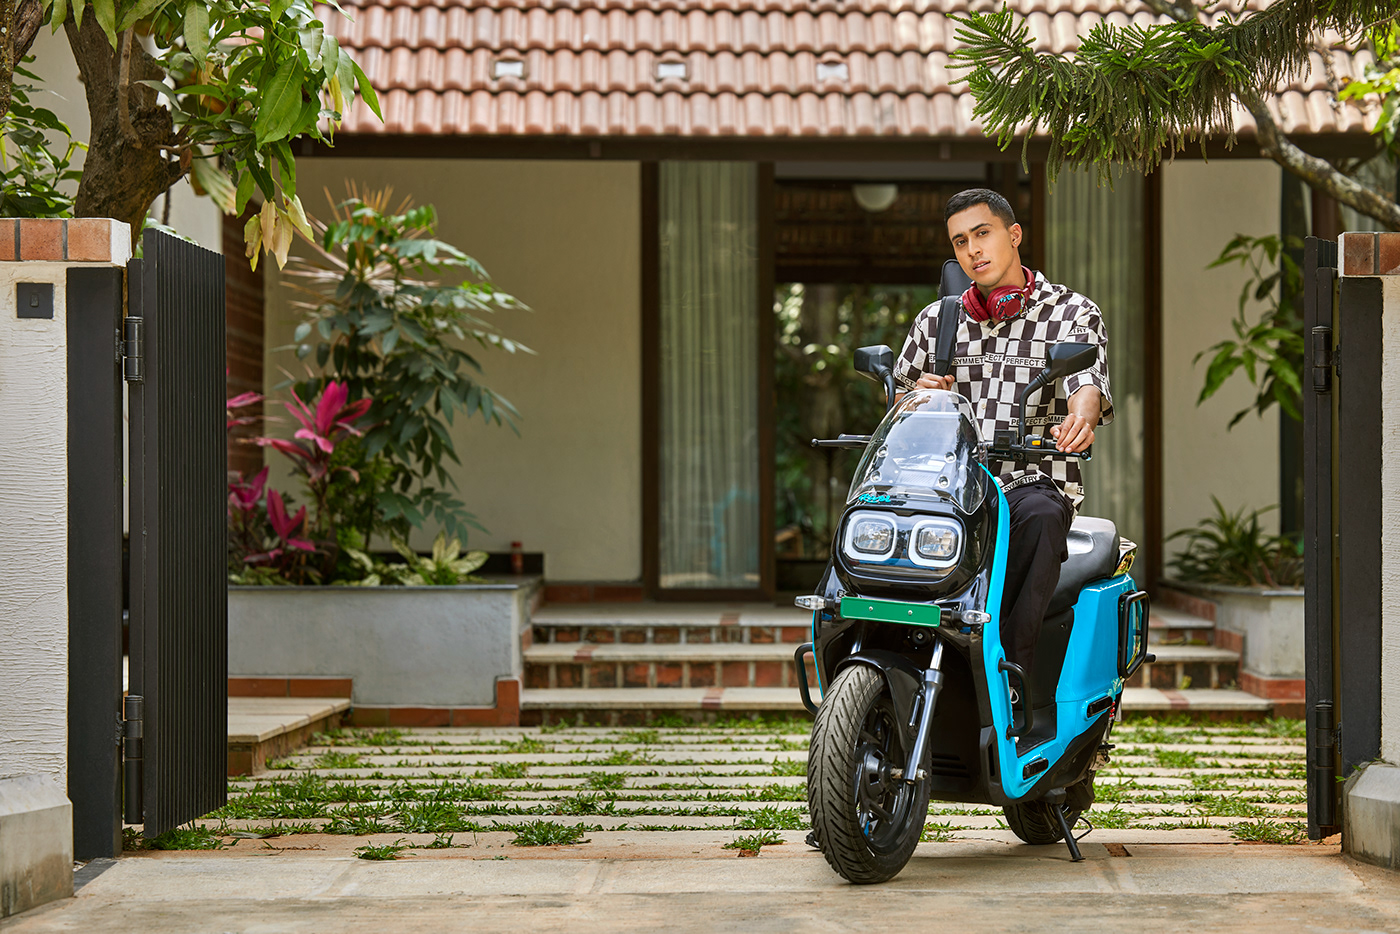 bangalore electric India motorcycle ride rugged Scooter spacious Startup stunning